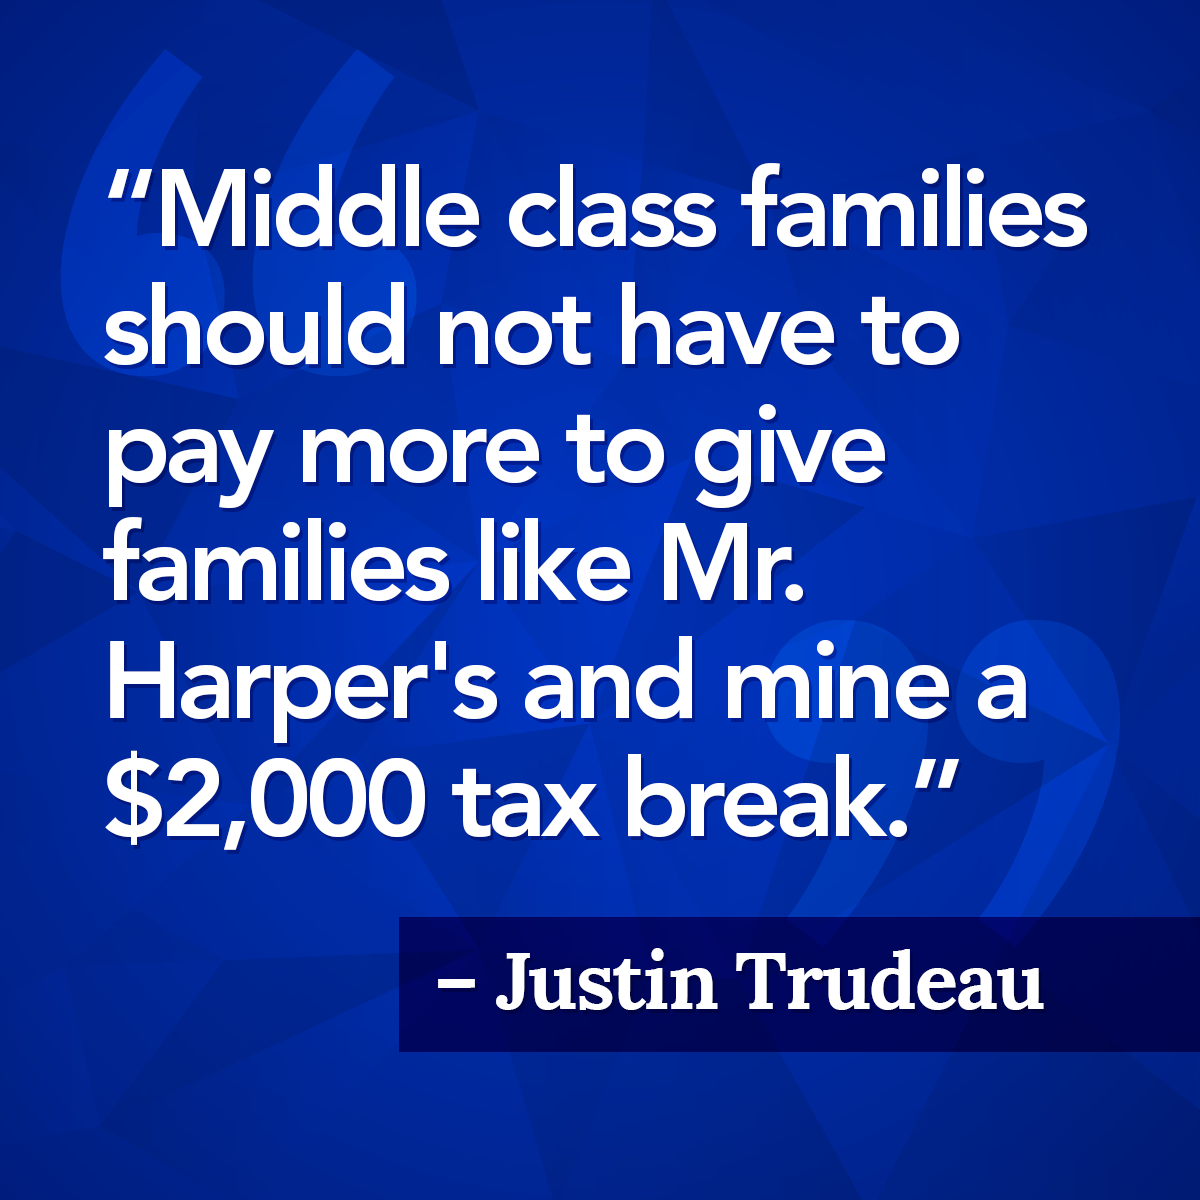 Middle class families should not have to pay more to give families like Mr. Harper's and mine a $2,000 tax break – Justin Trudeau